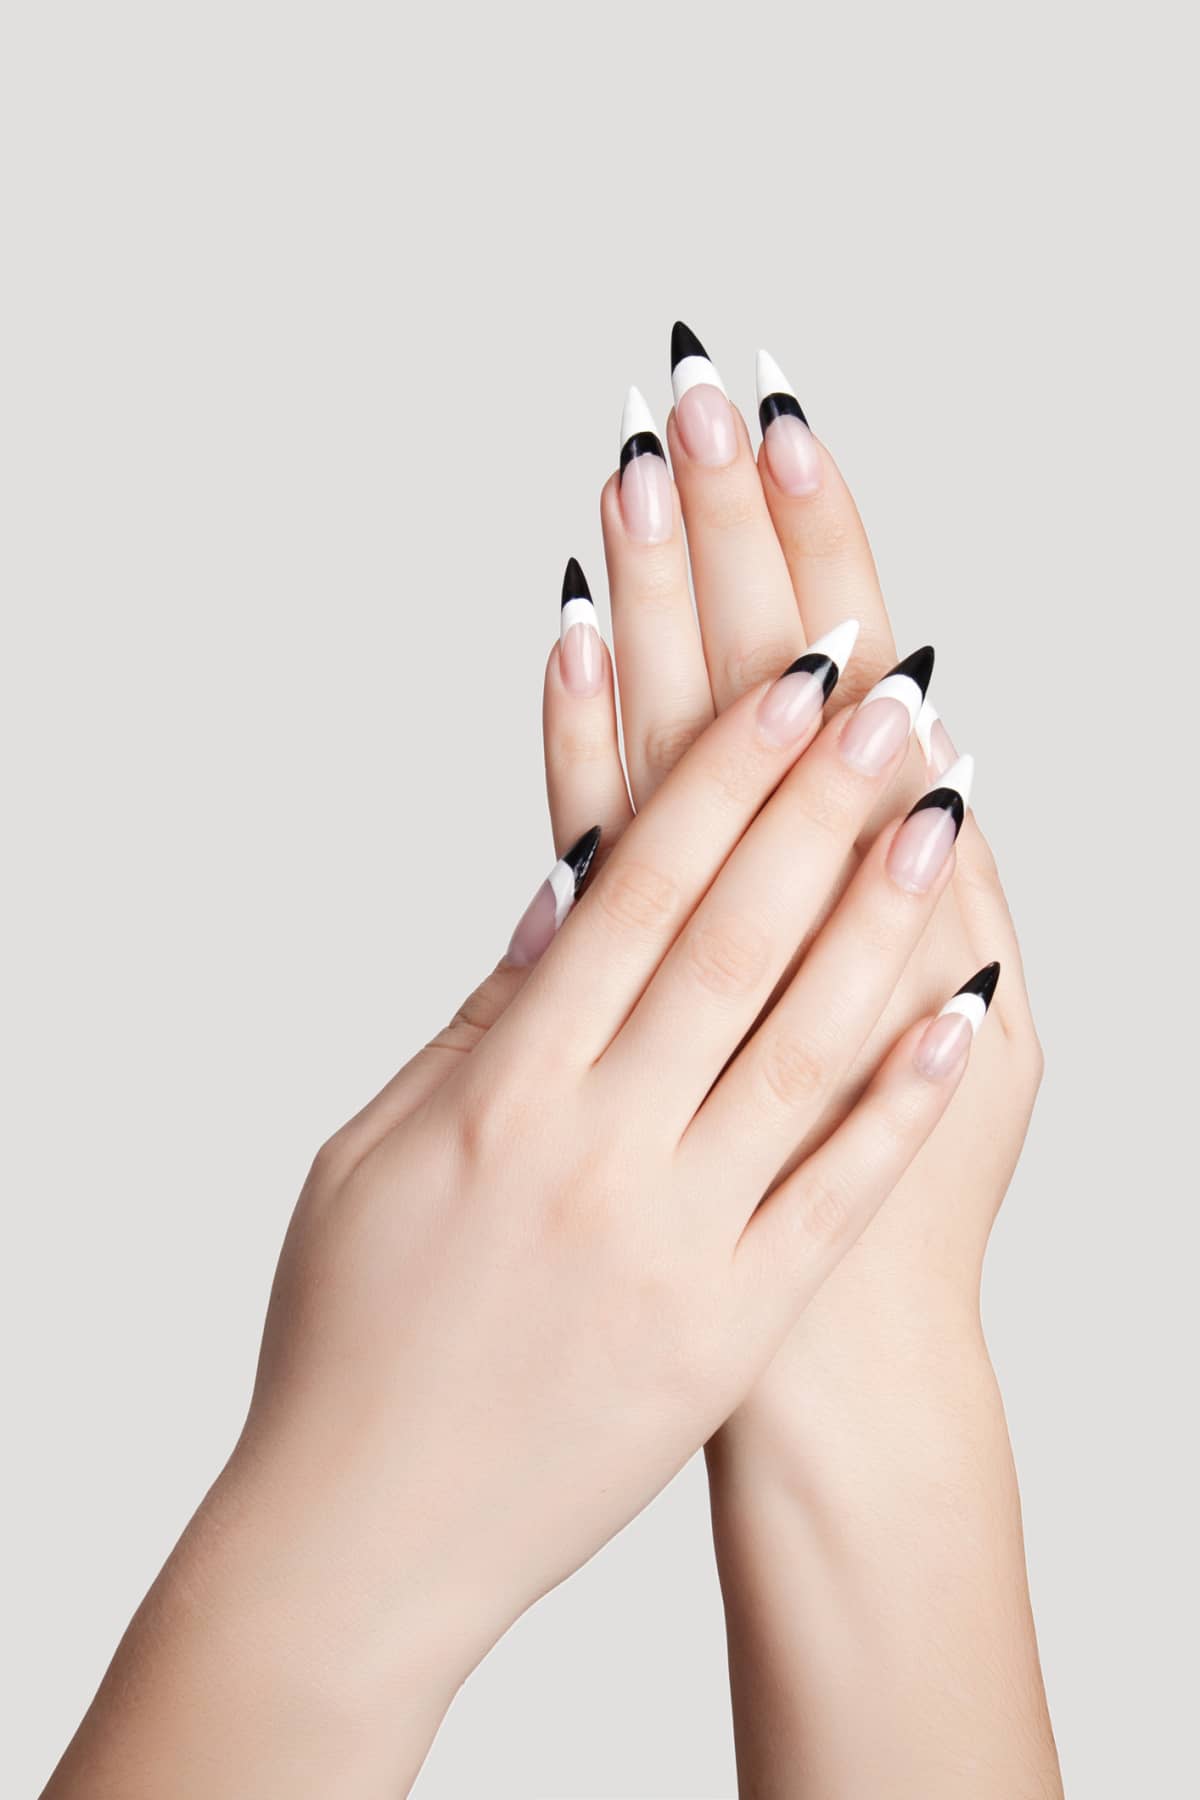 Two hands with beautiful nails sharp shape on gray background